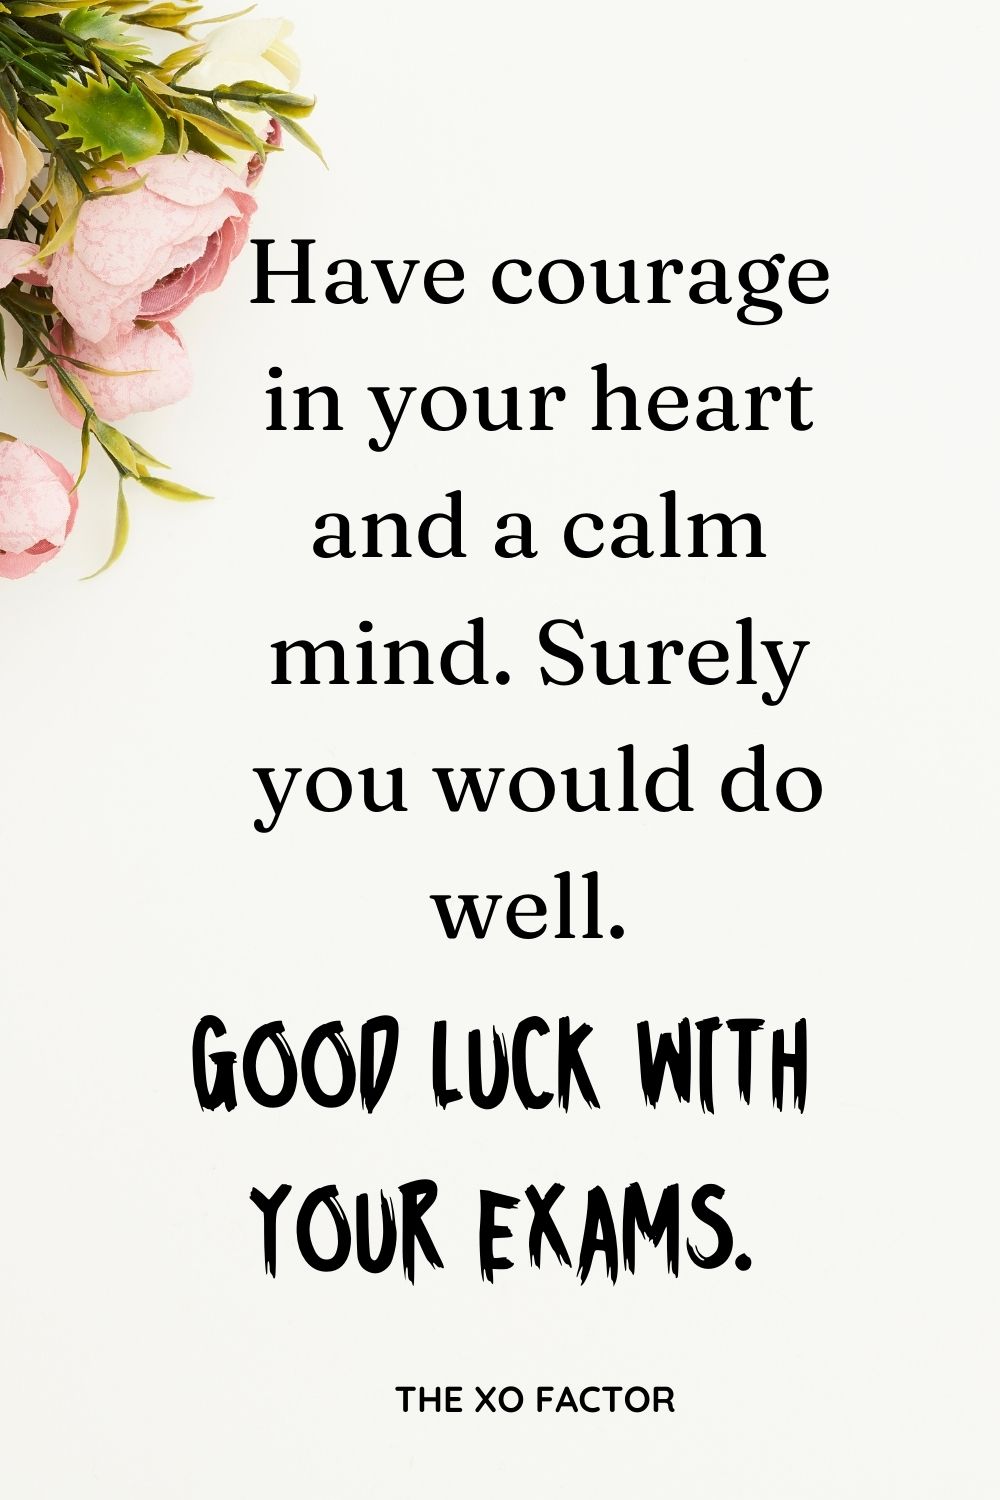 Have courage in your heart and a calm mind. Surely you would do well. Good luck with your exams.